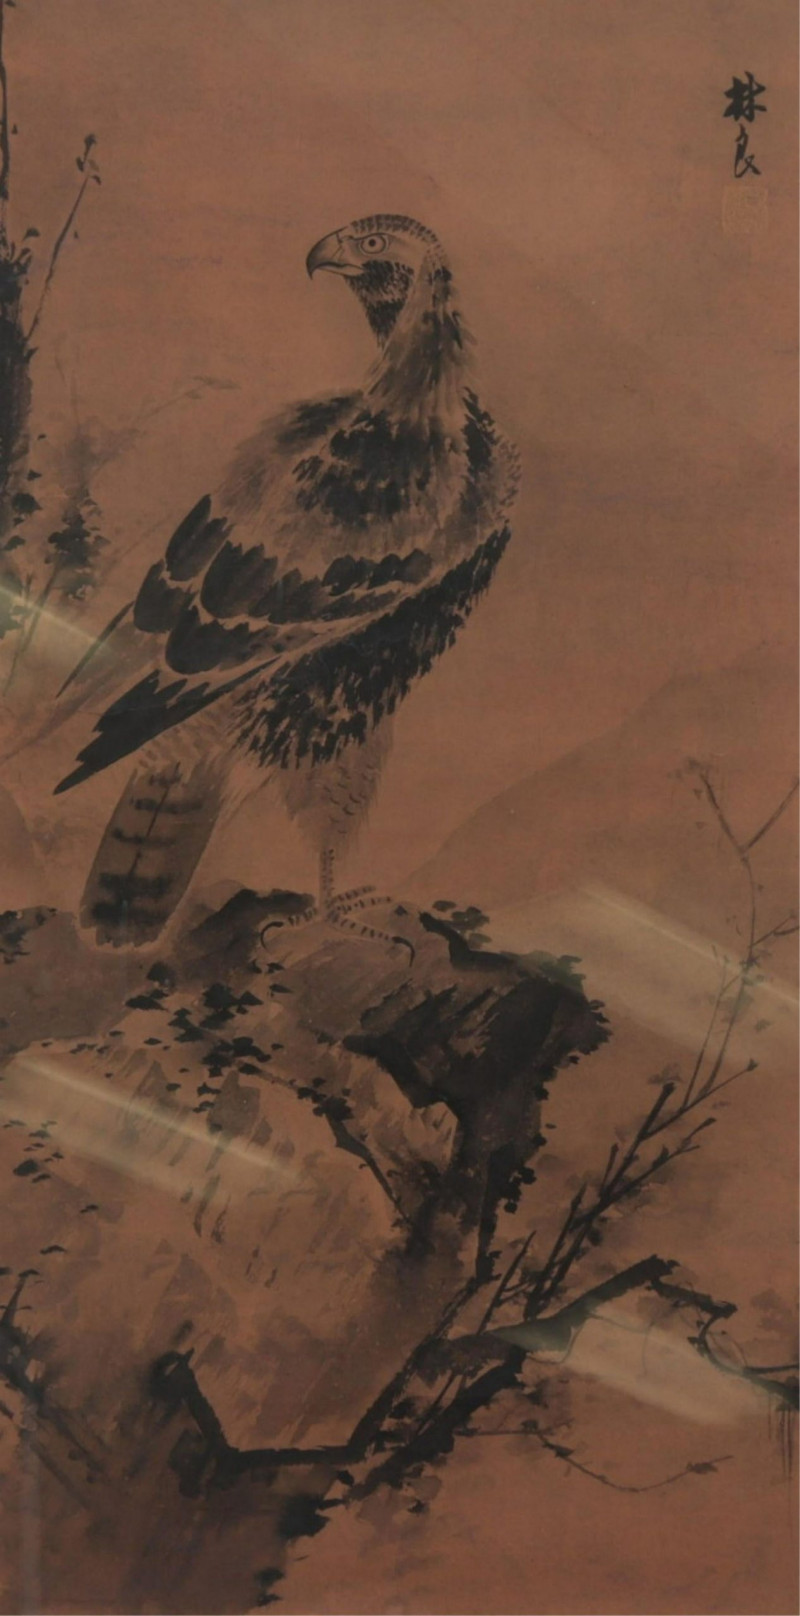 after Lin Liang Painting of Hawk